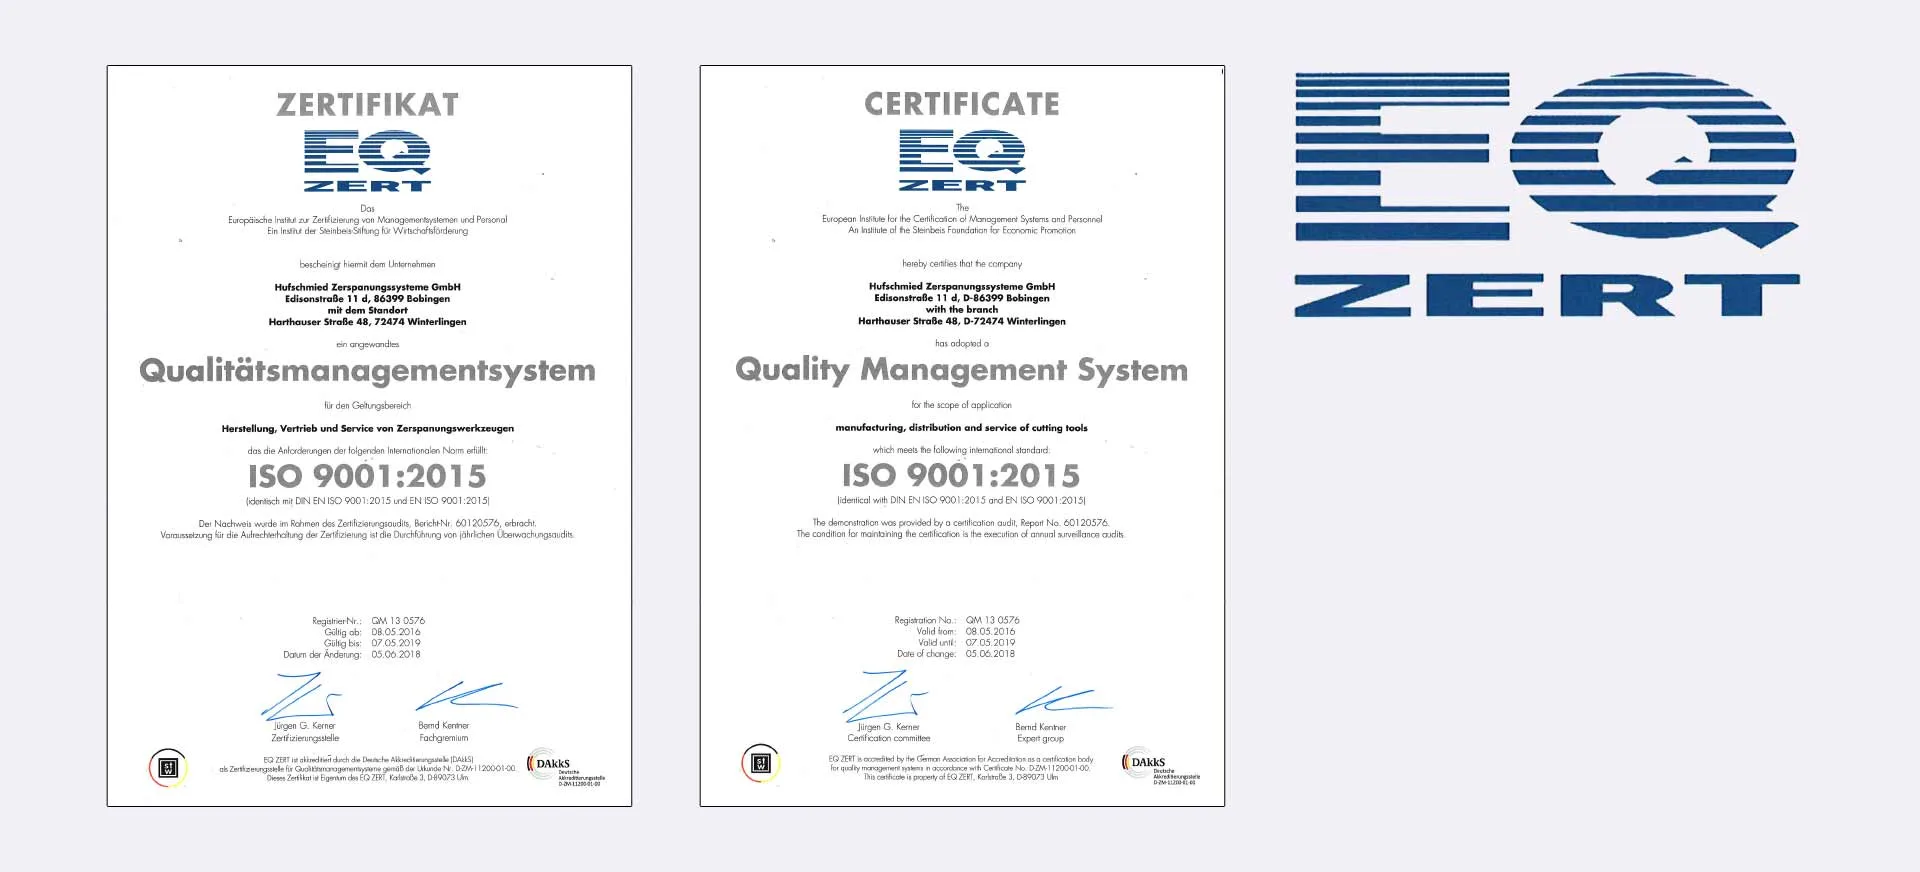 Certificate 'ISO 9001:2015'